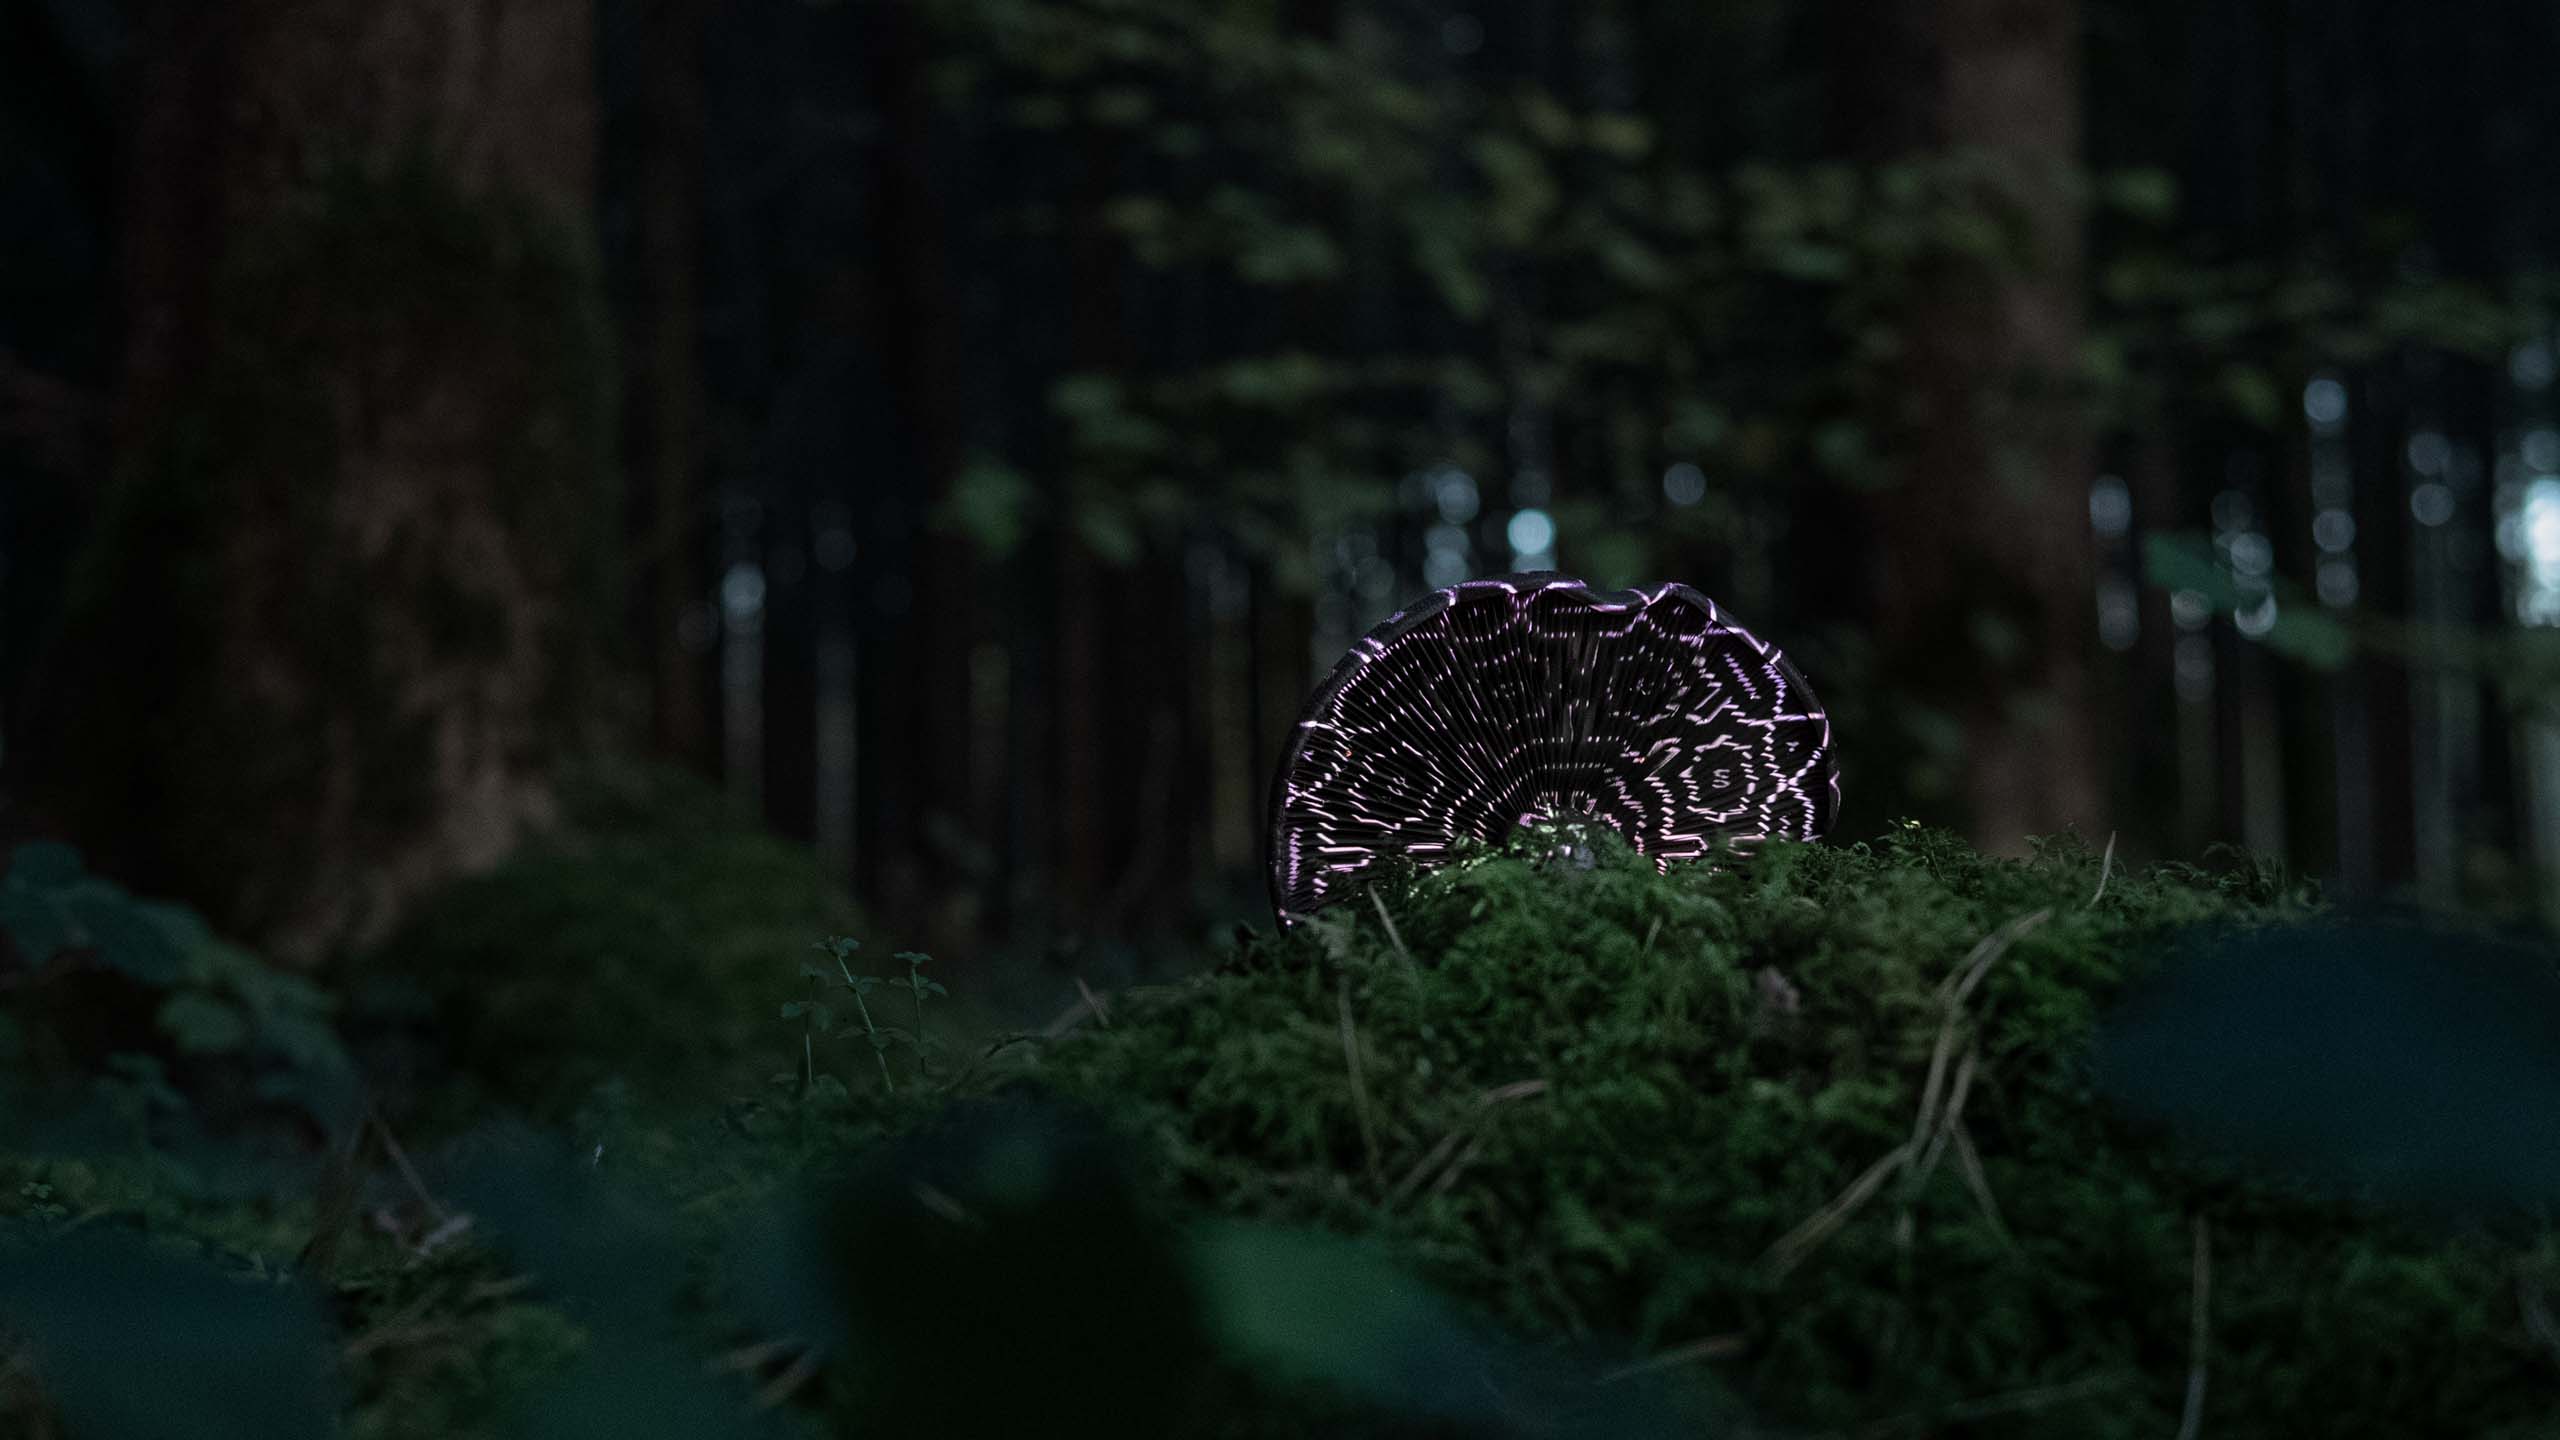 Video projection with white geometric pattern in a forest on a Mushroom